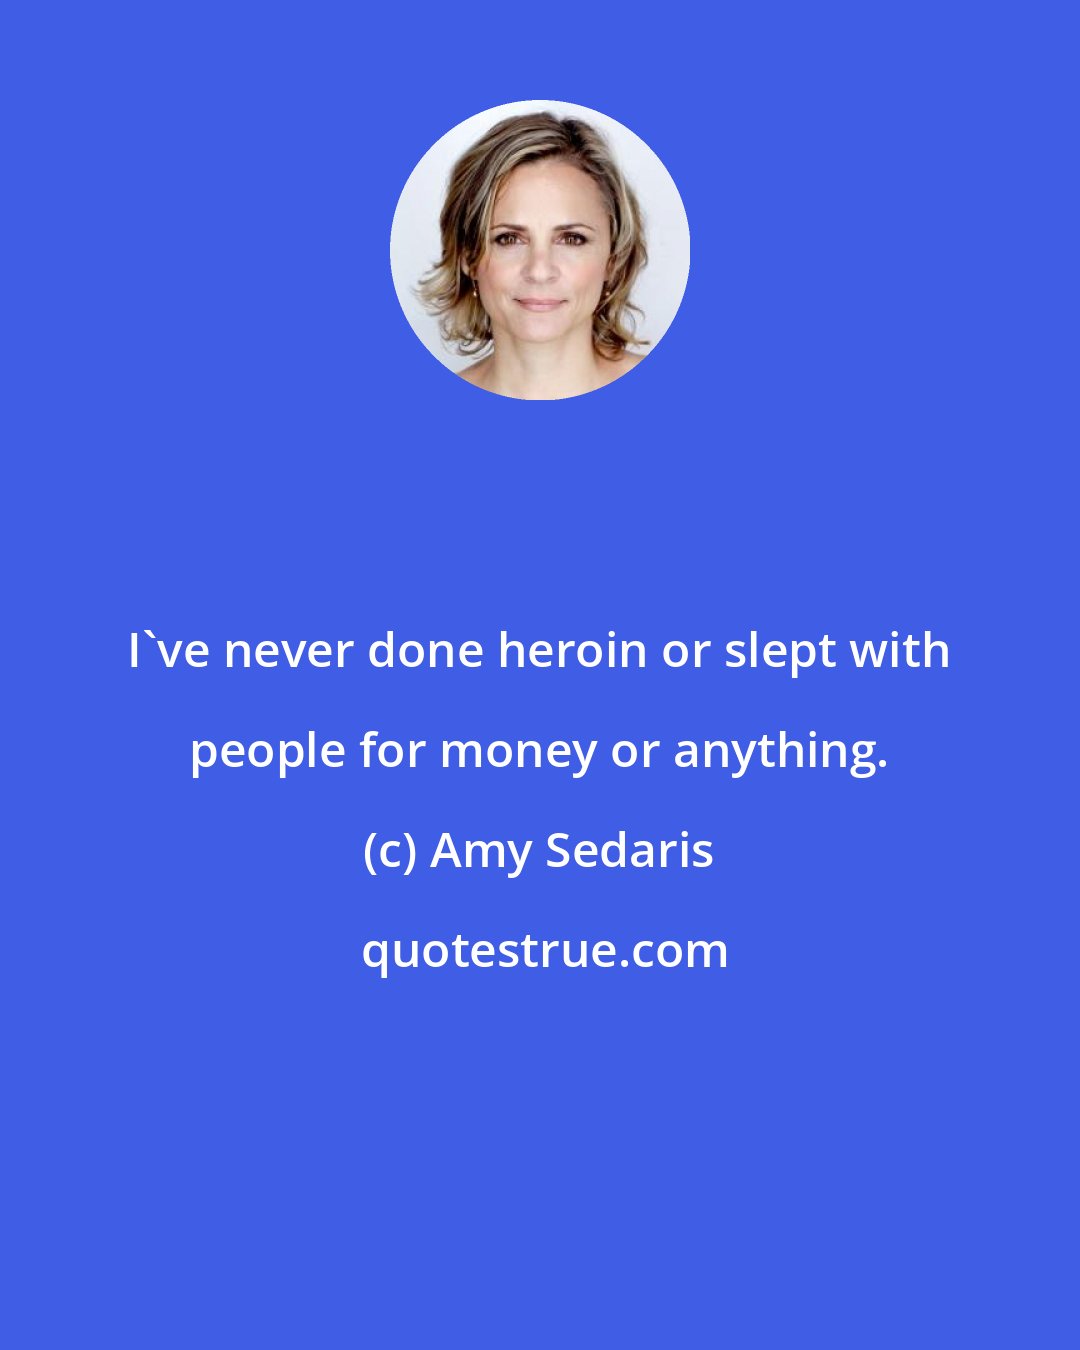 Amy Sedaris: I've never done heroin or slept with people for money or anything.